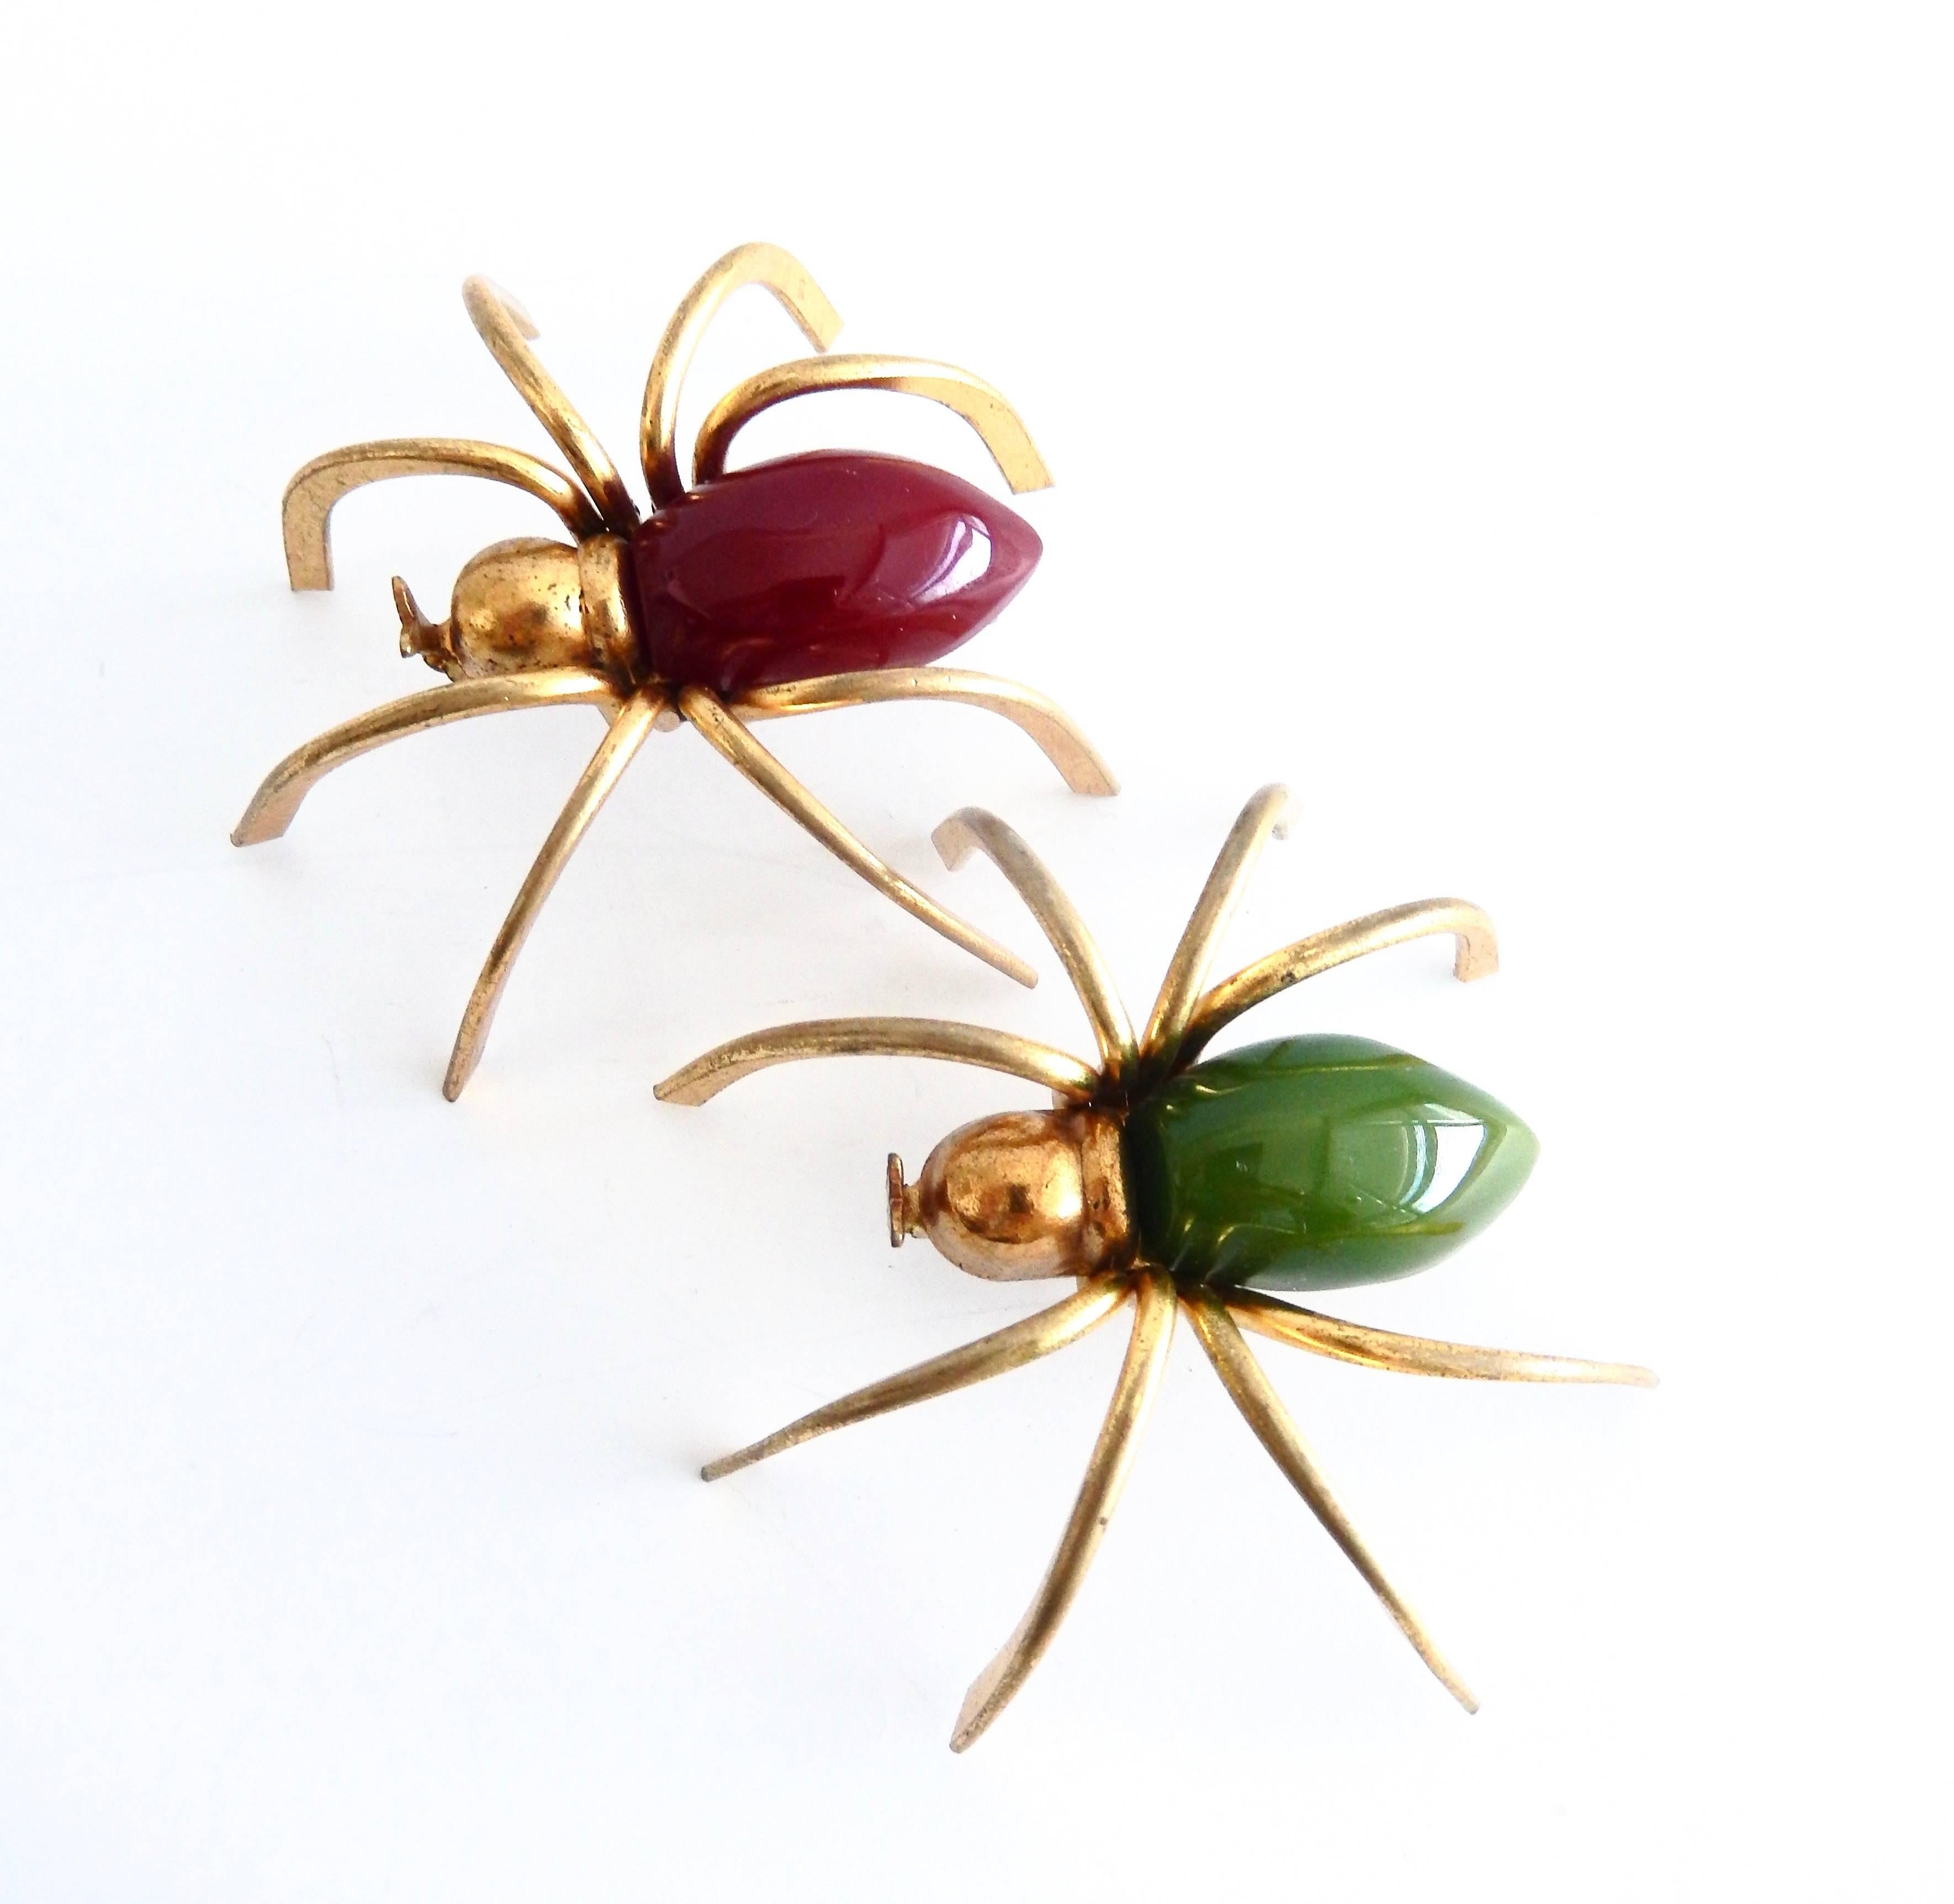 A captivating three-dimensional gilt metal spider pin with red bakelite body from the 1930s. In exceptionally good condition and a fine example of American Art Deco jewelry.   Will be a big hit at your next holiday party.

Note - Image shows 2 pins,